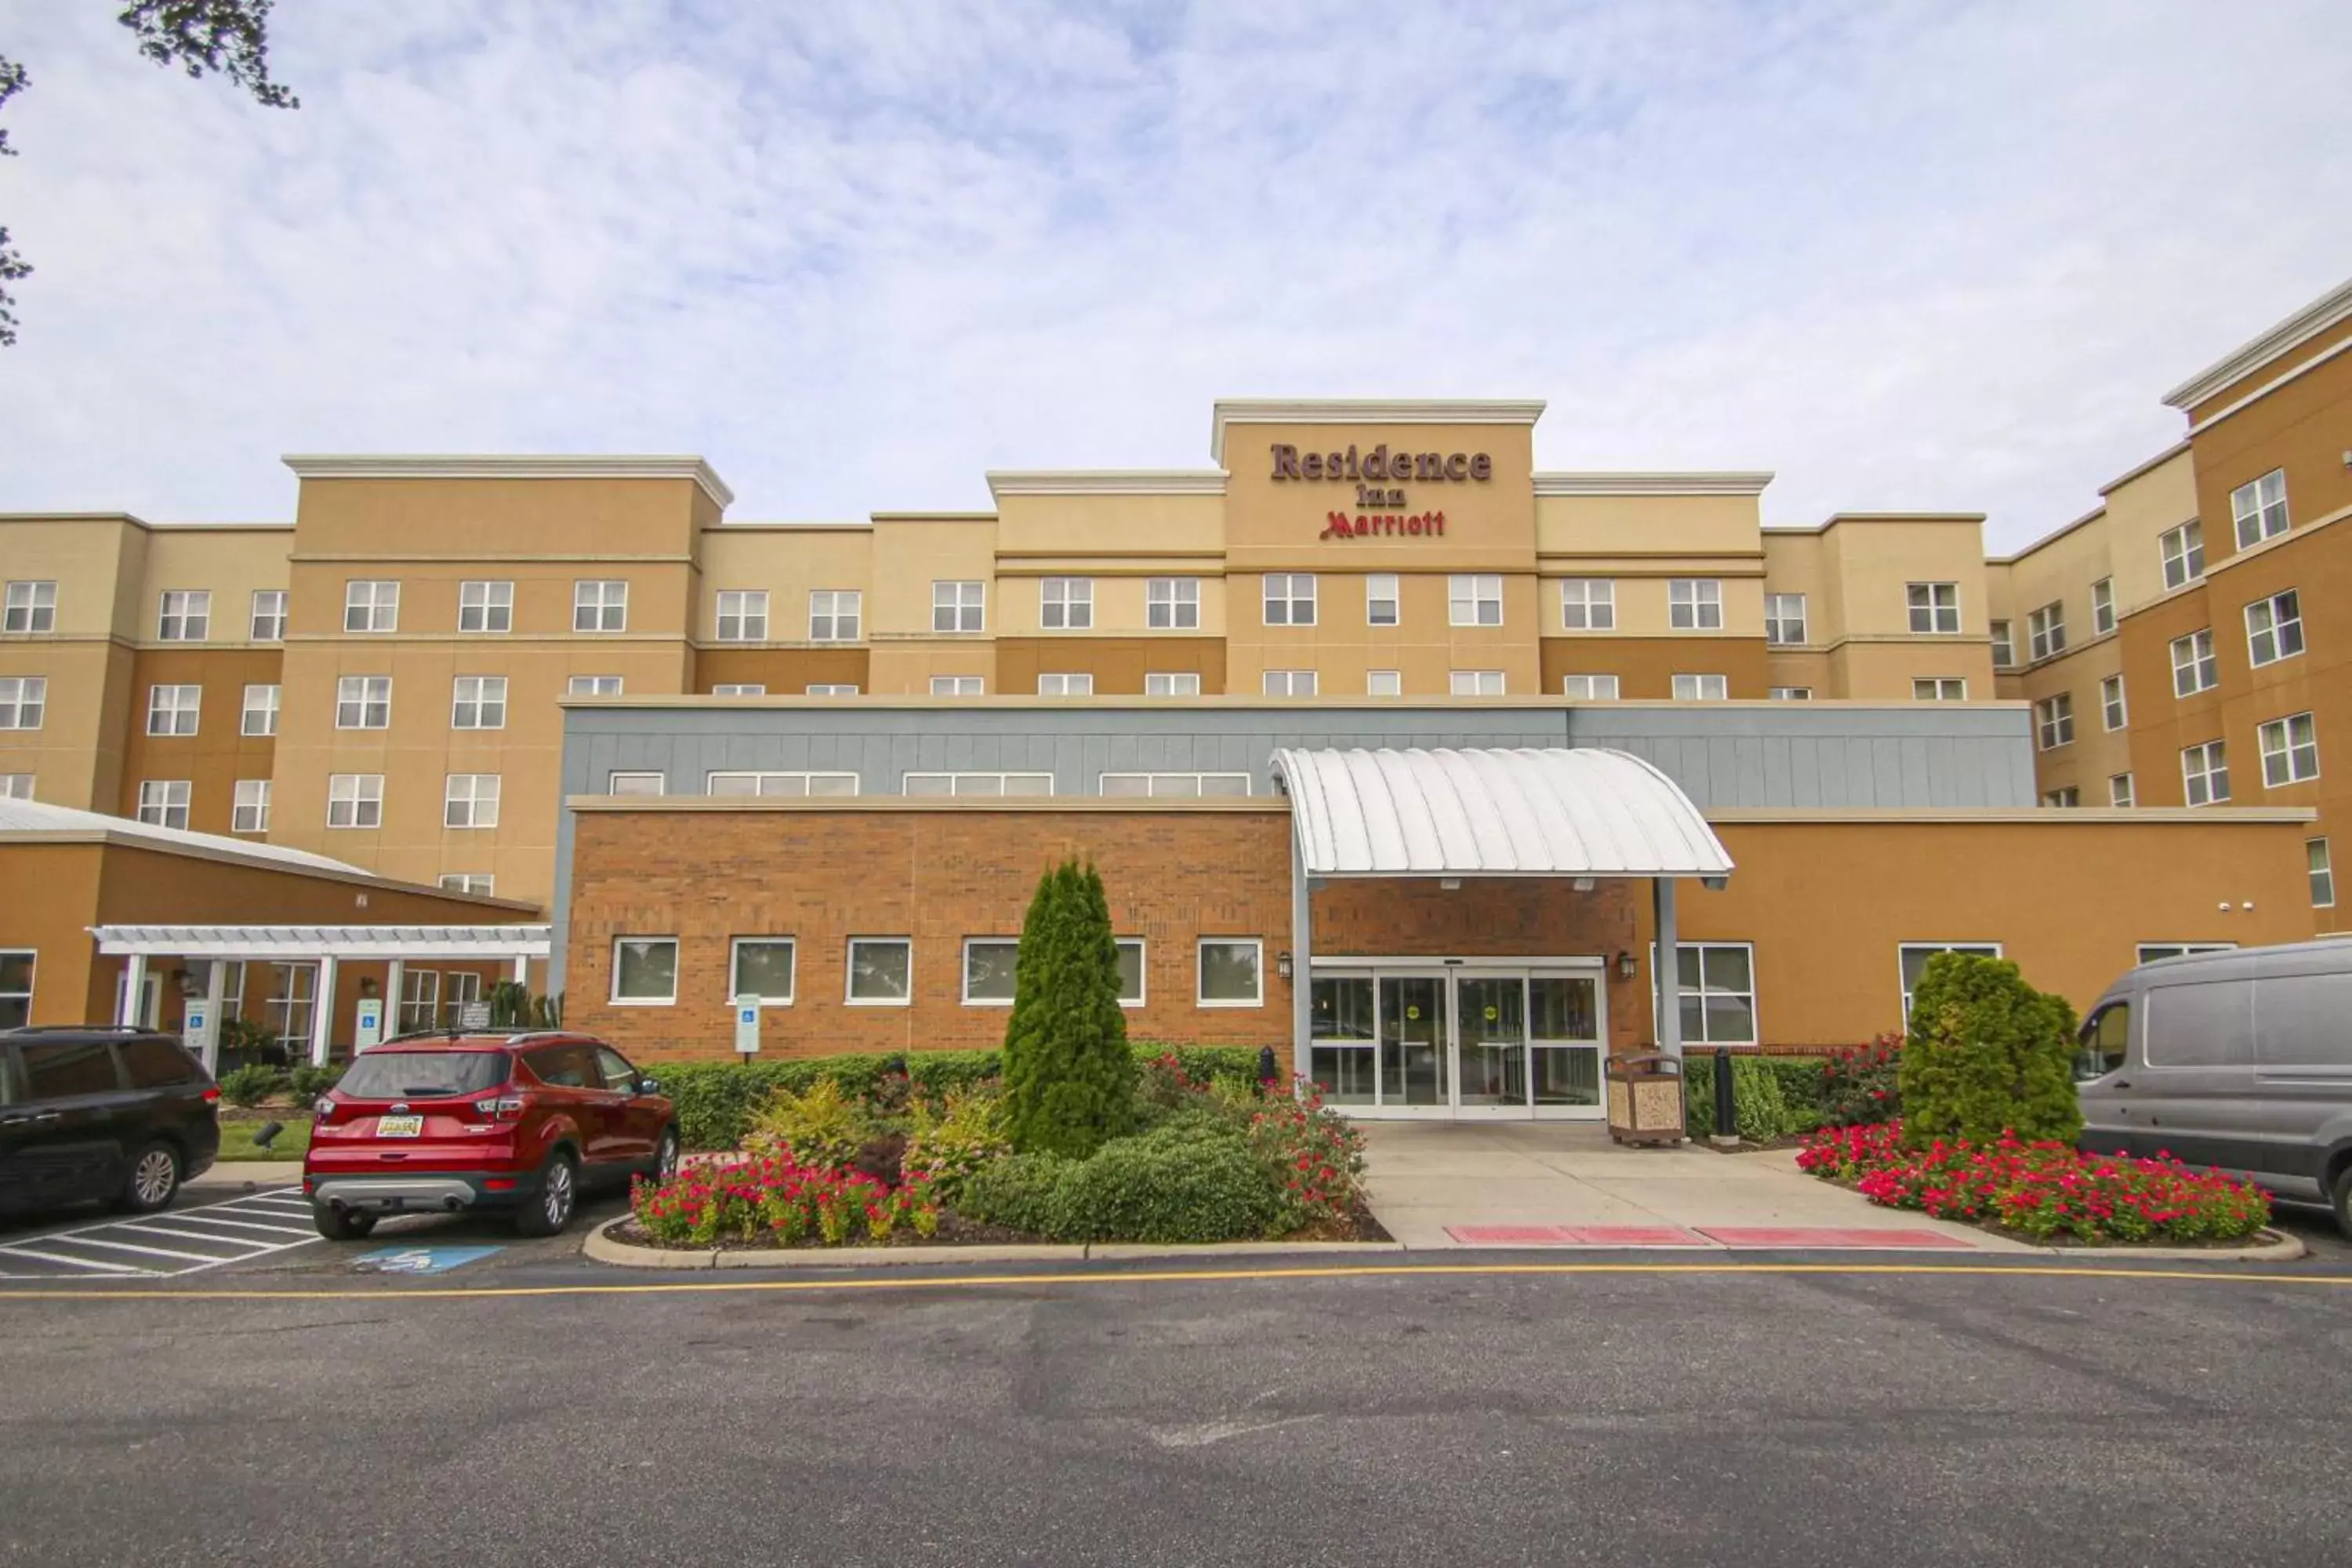 Property Building in Residence Inn Newport News Airport